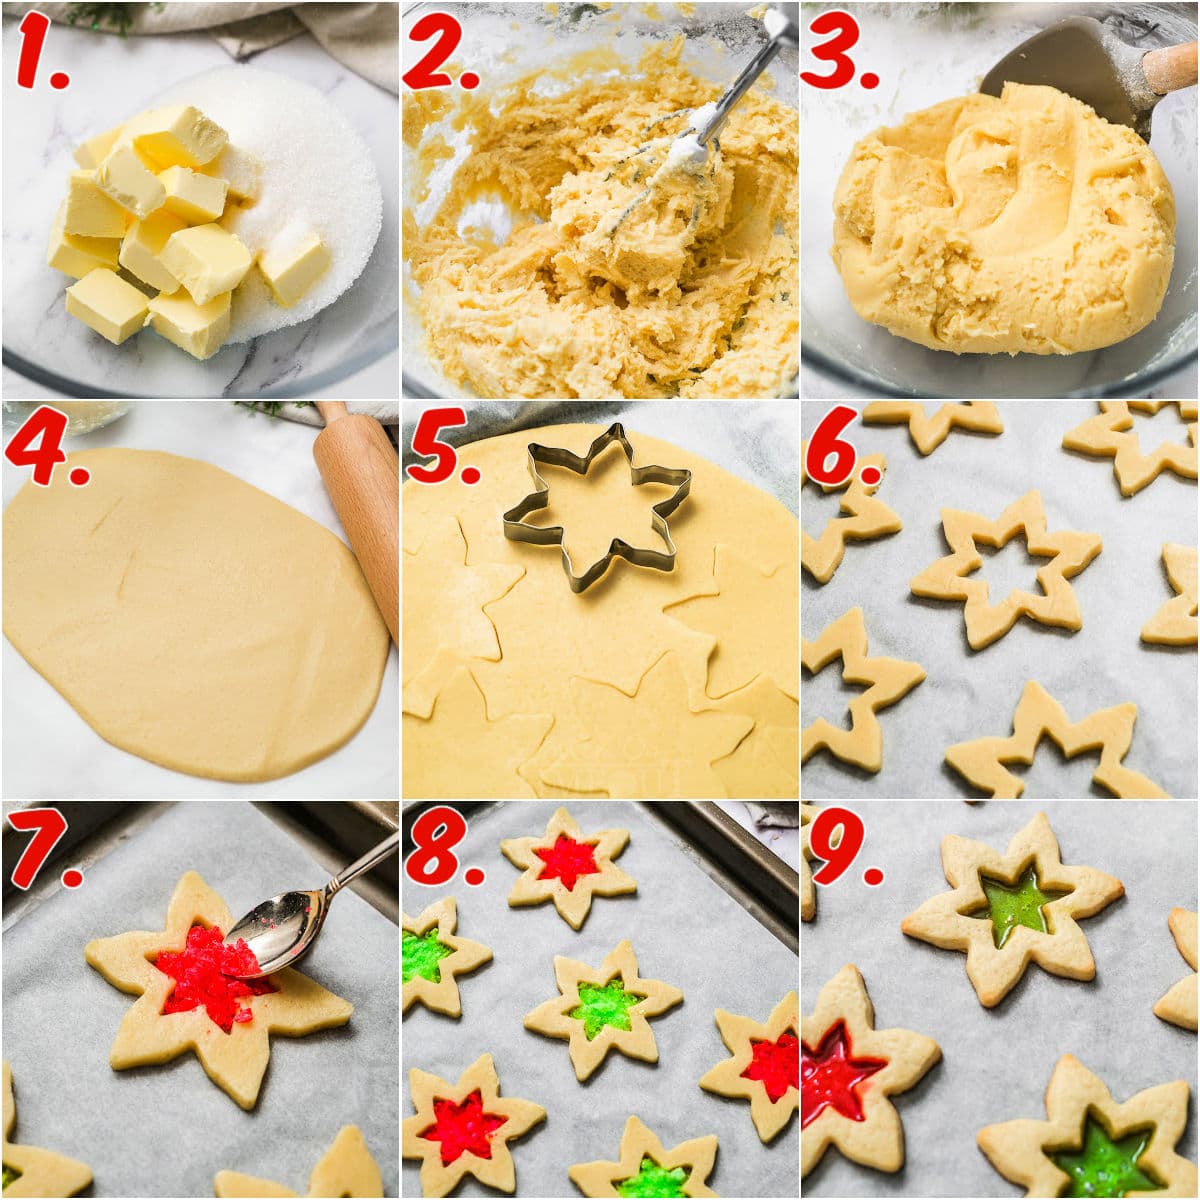 nine image collage showing step by step how to make stained glass cookie recipe.